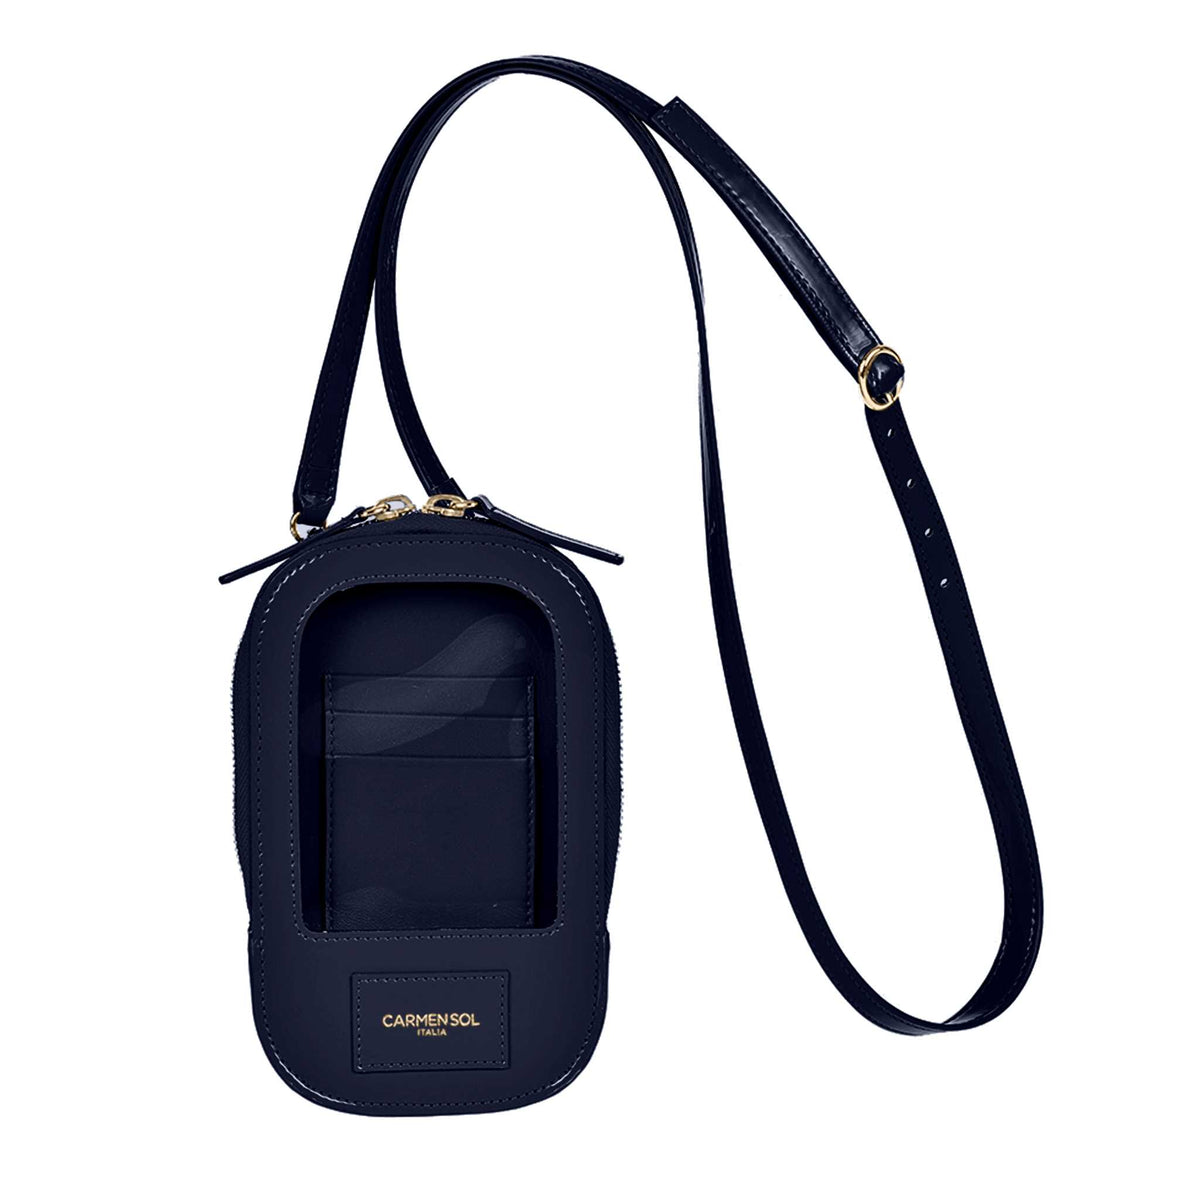 Gio smartphone holder in color navy blue from Carmen Sol